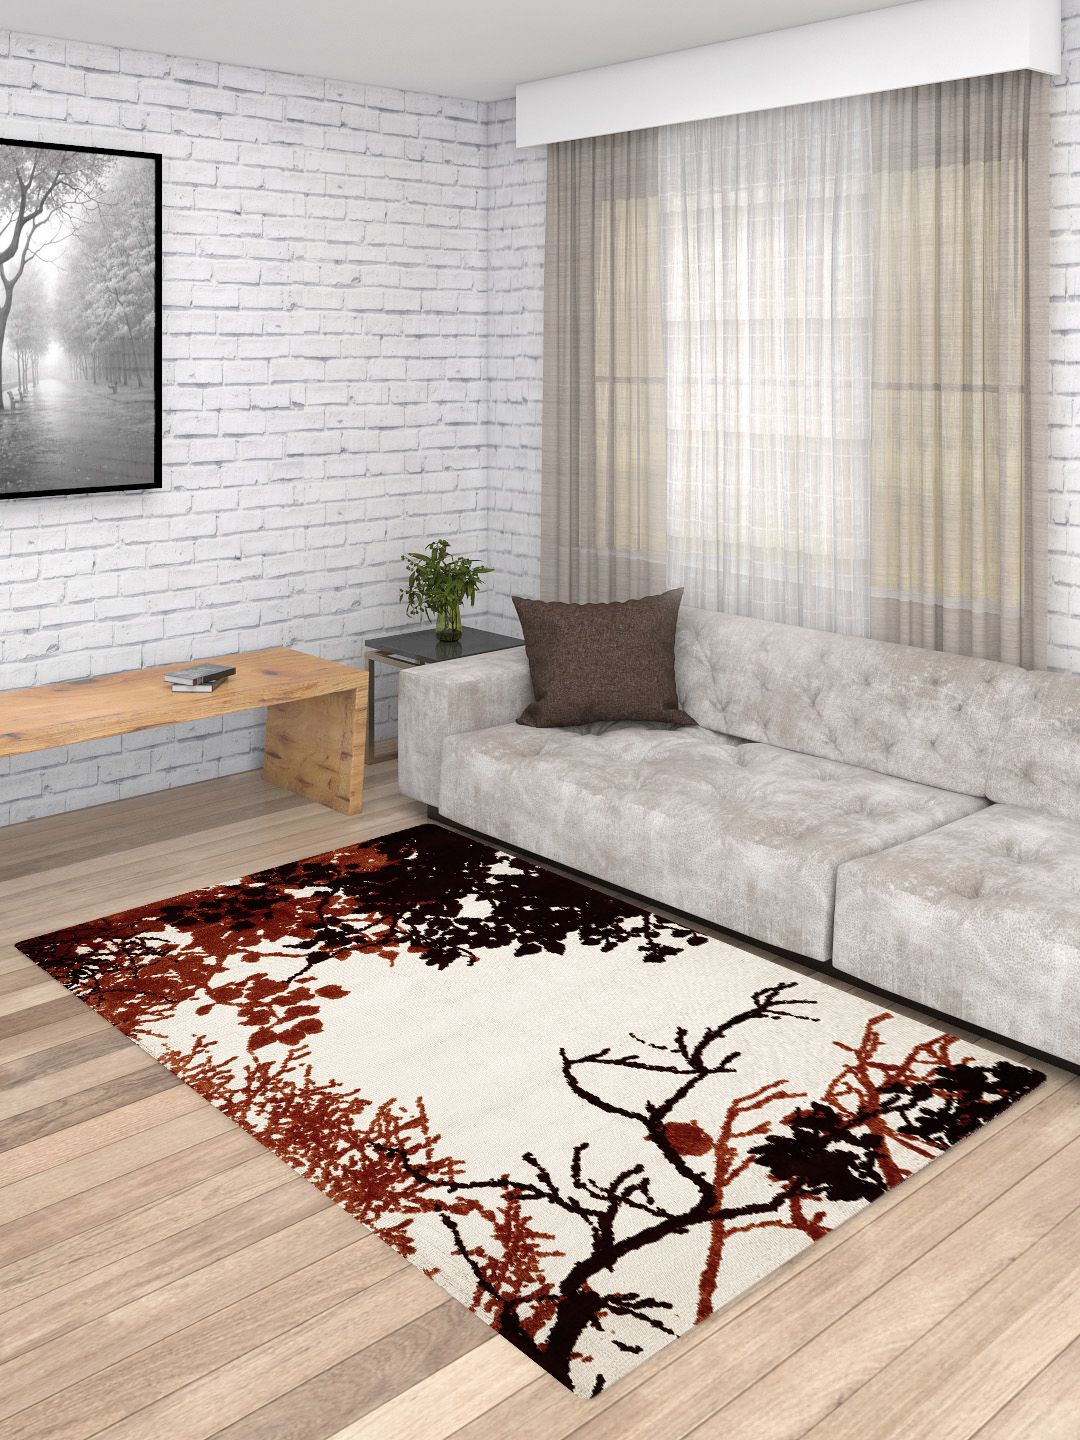 PRESTO Off White & Brown Floral Printed Heavy Shaggy Anti-Skid Carpet Price in India